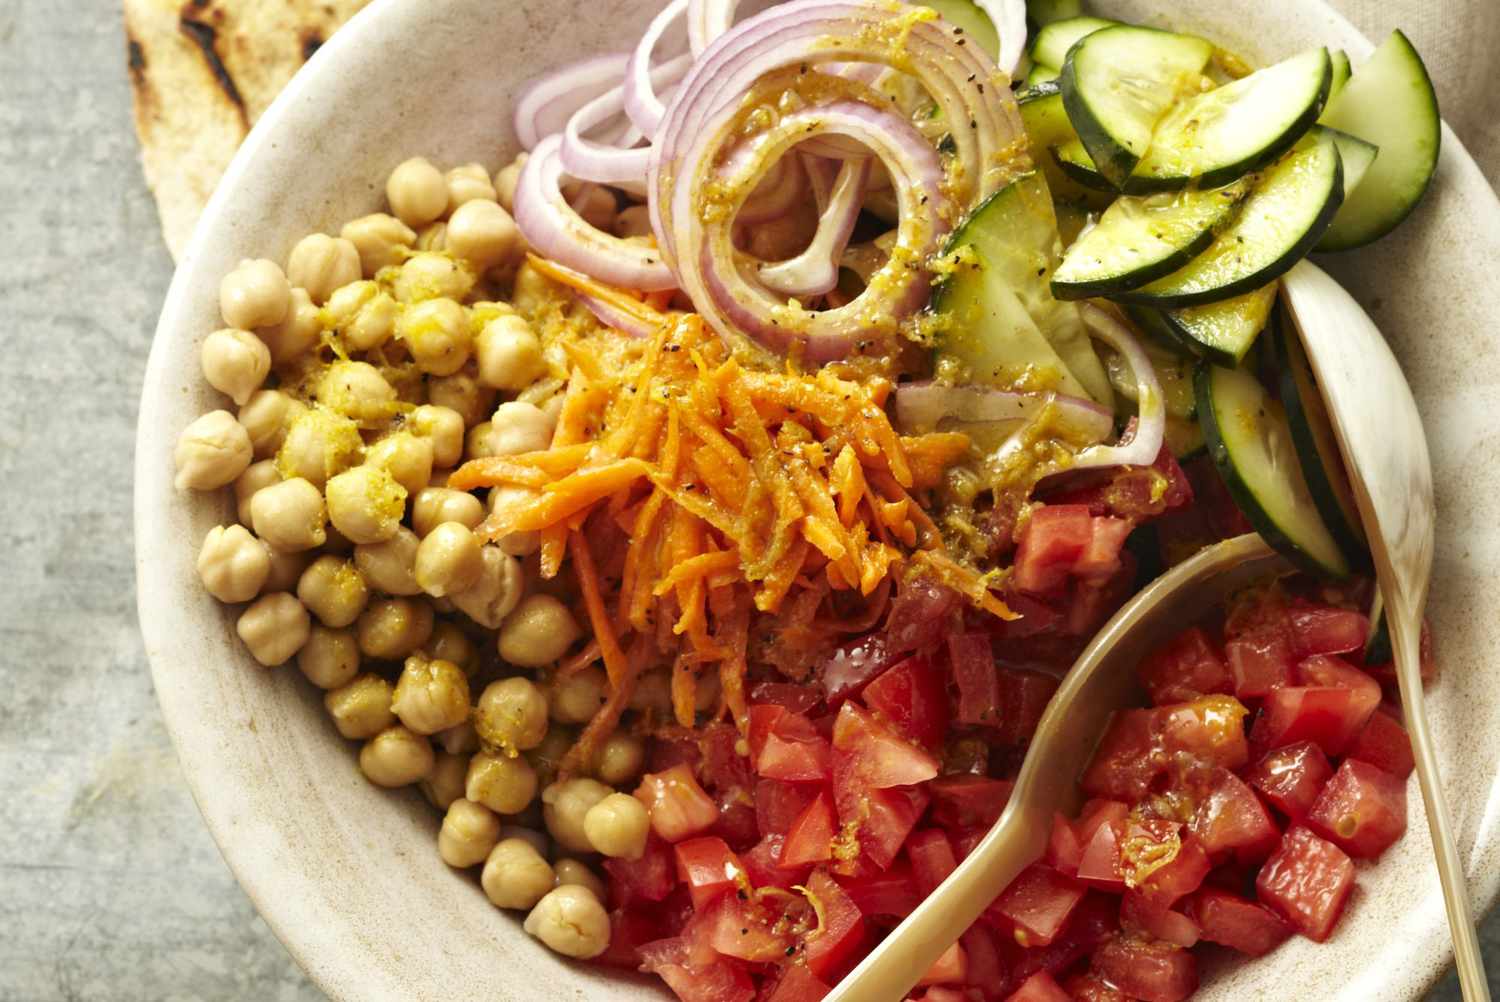 garbanzo bean salad with tomatoes, cucumber, shredded carrots, purple onions, and pita